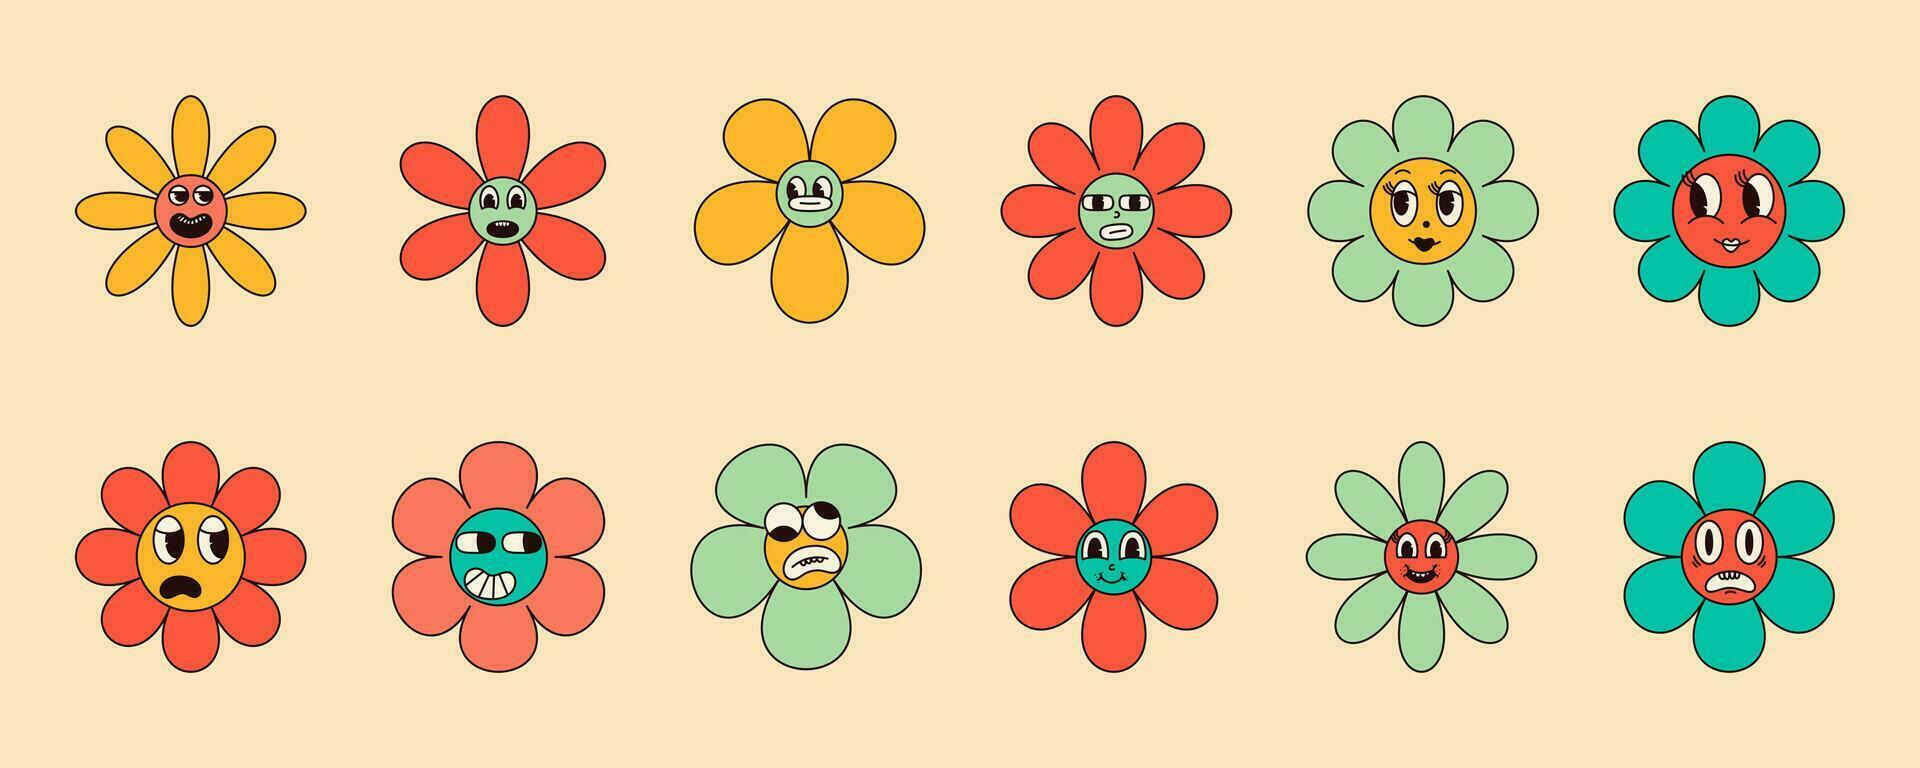 Set of 70s groovy daisy flowers with funny faces in Hippie retro style. Vector illustration